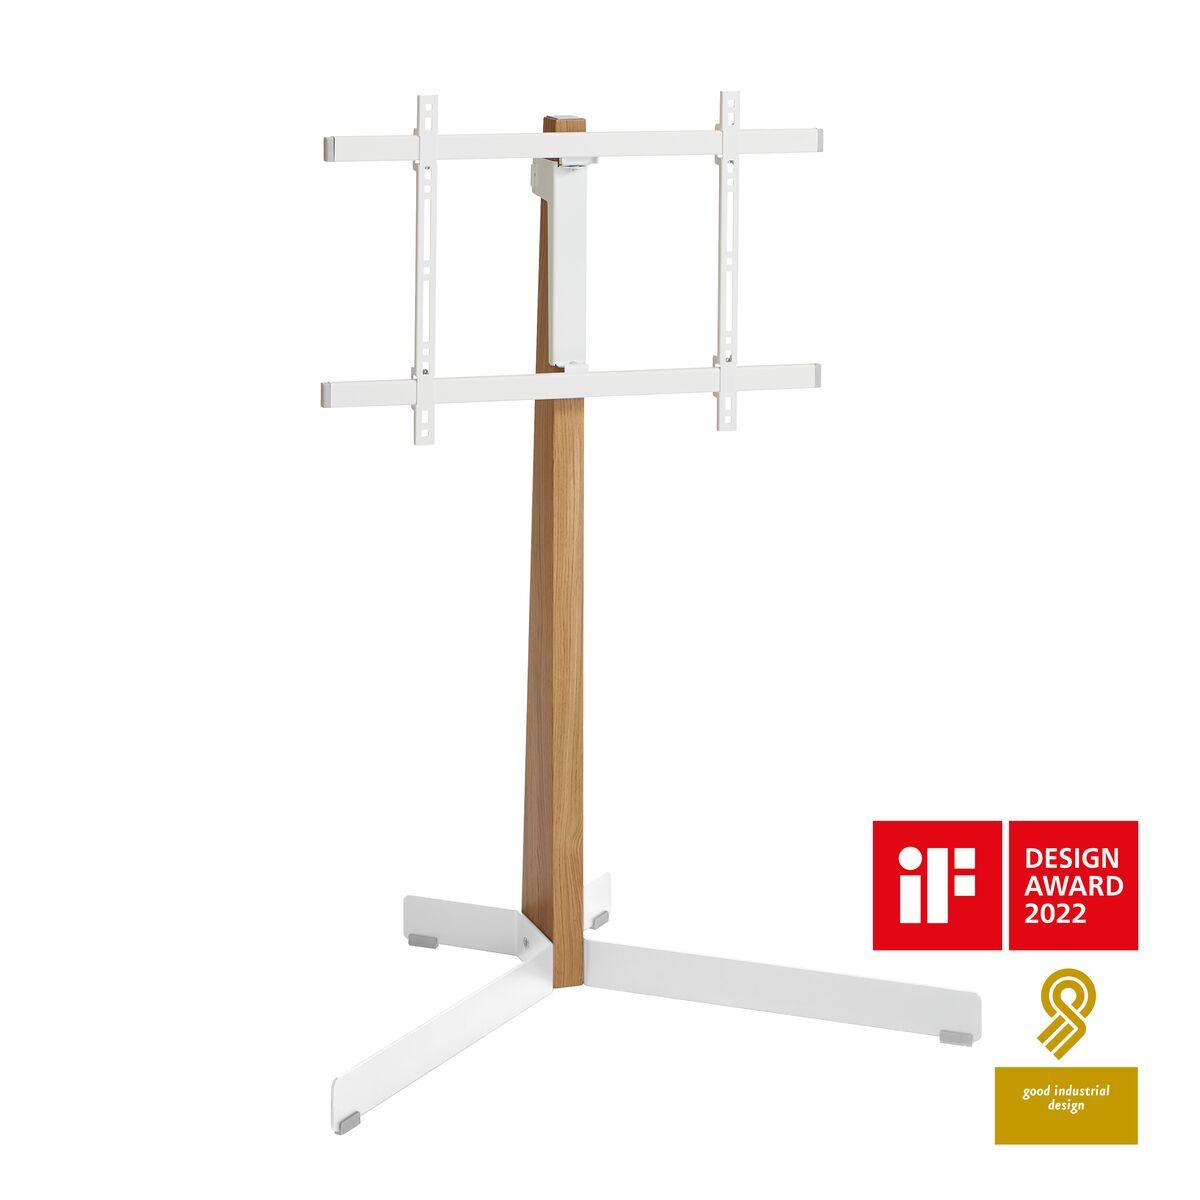 Vogel's TVS 3695 TV Floor Stand (white) - Suitable for 40 up to 77 inch TVs up to 50 kg - Promo